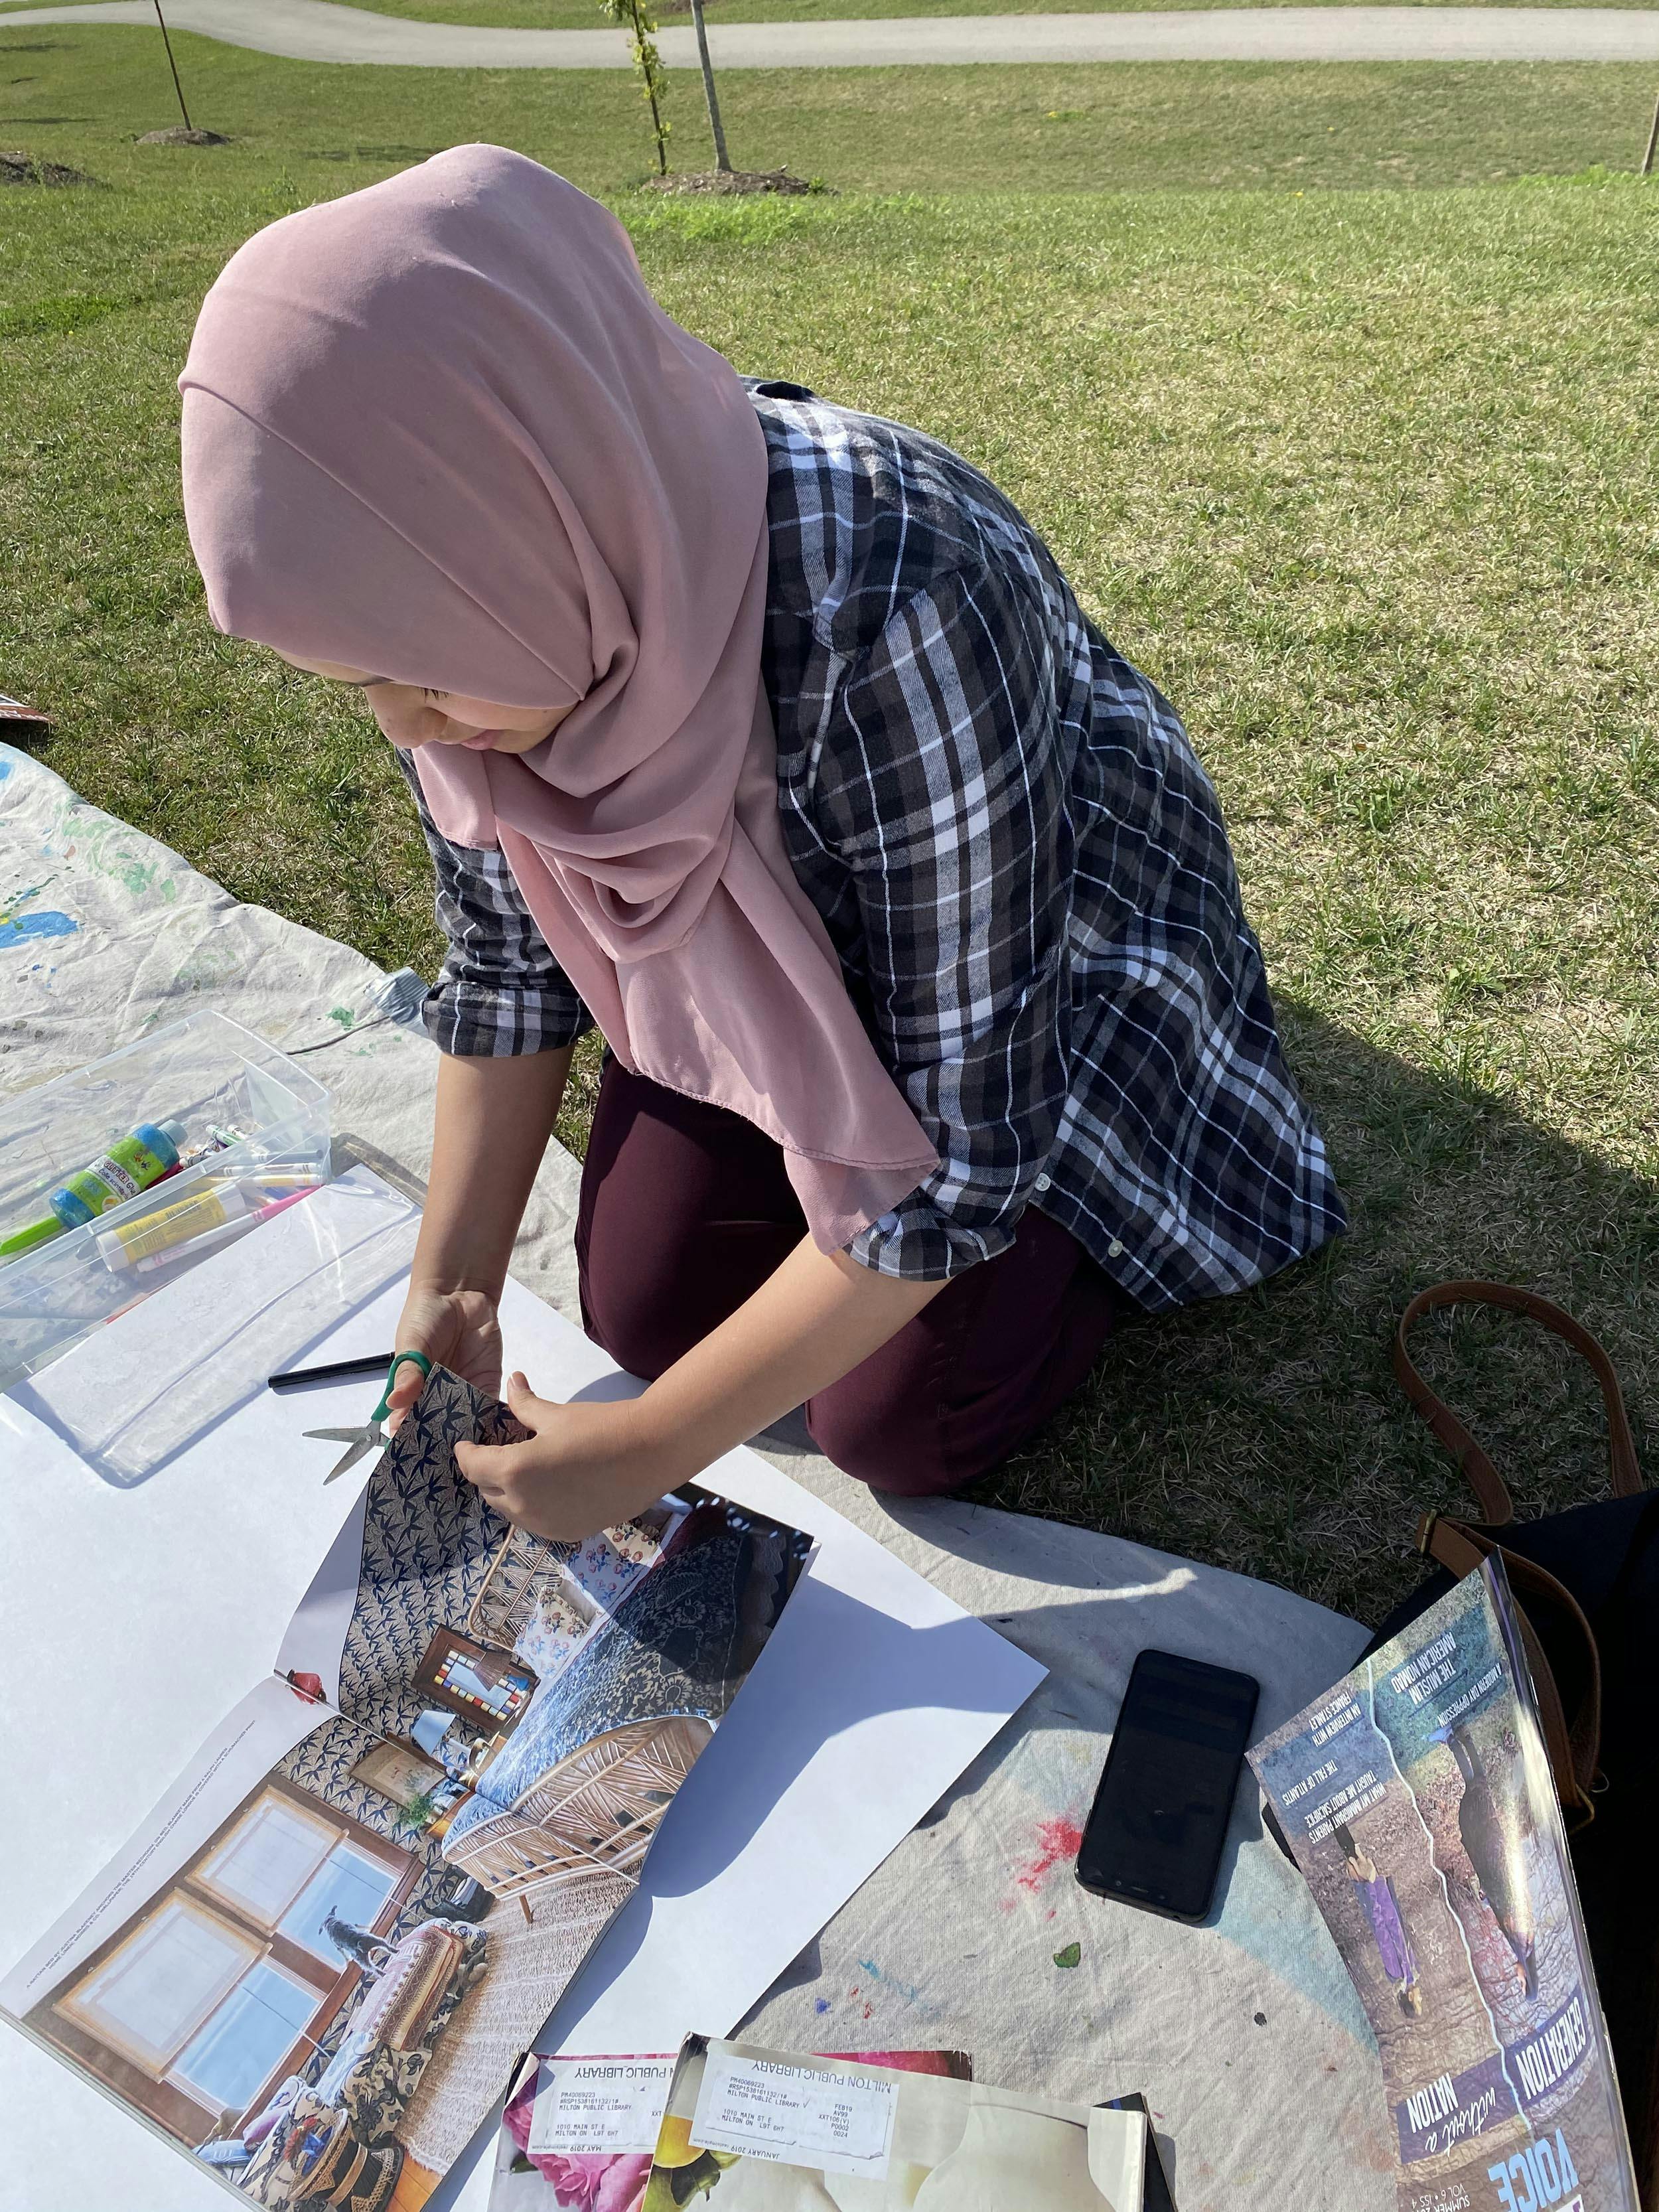 Saleha working on a collage.